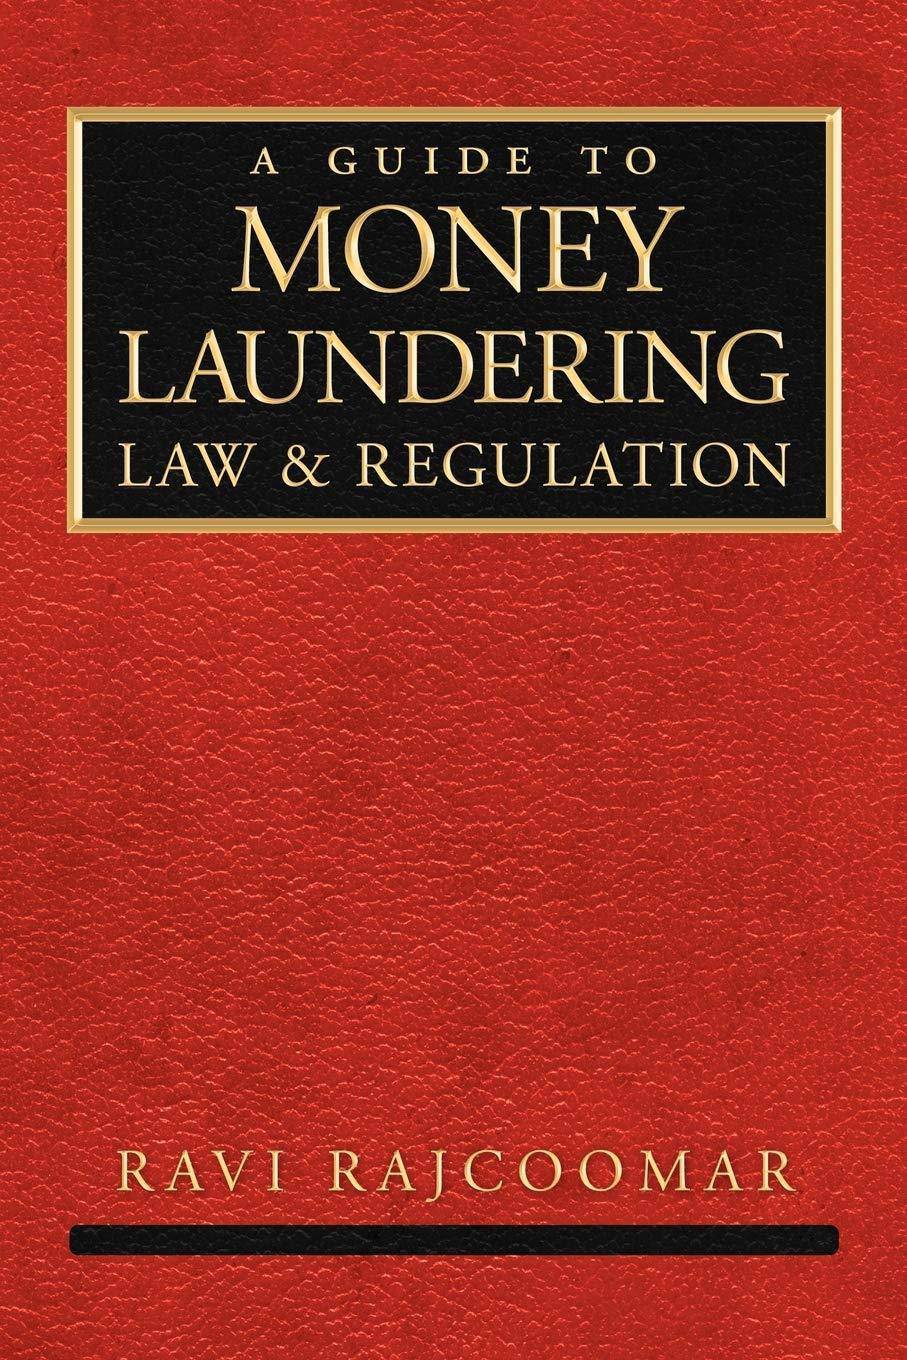 A Guide to Money Laundering Law and Regulation - SureShot Books Publishing LLC